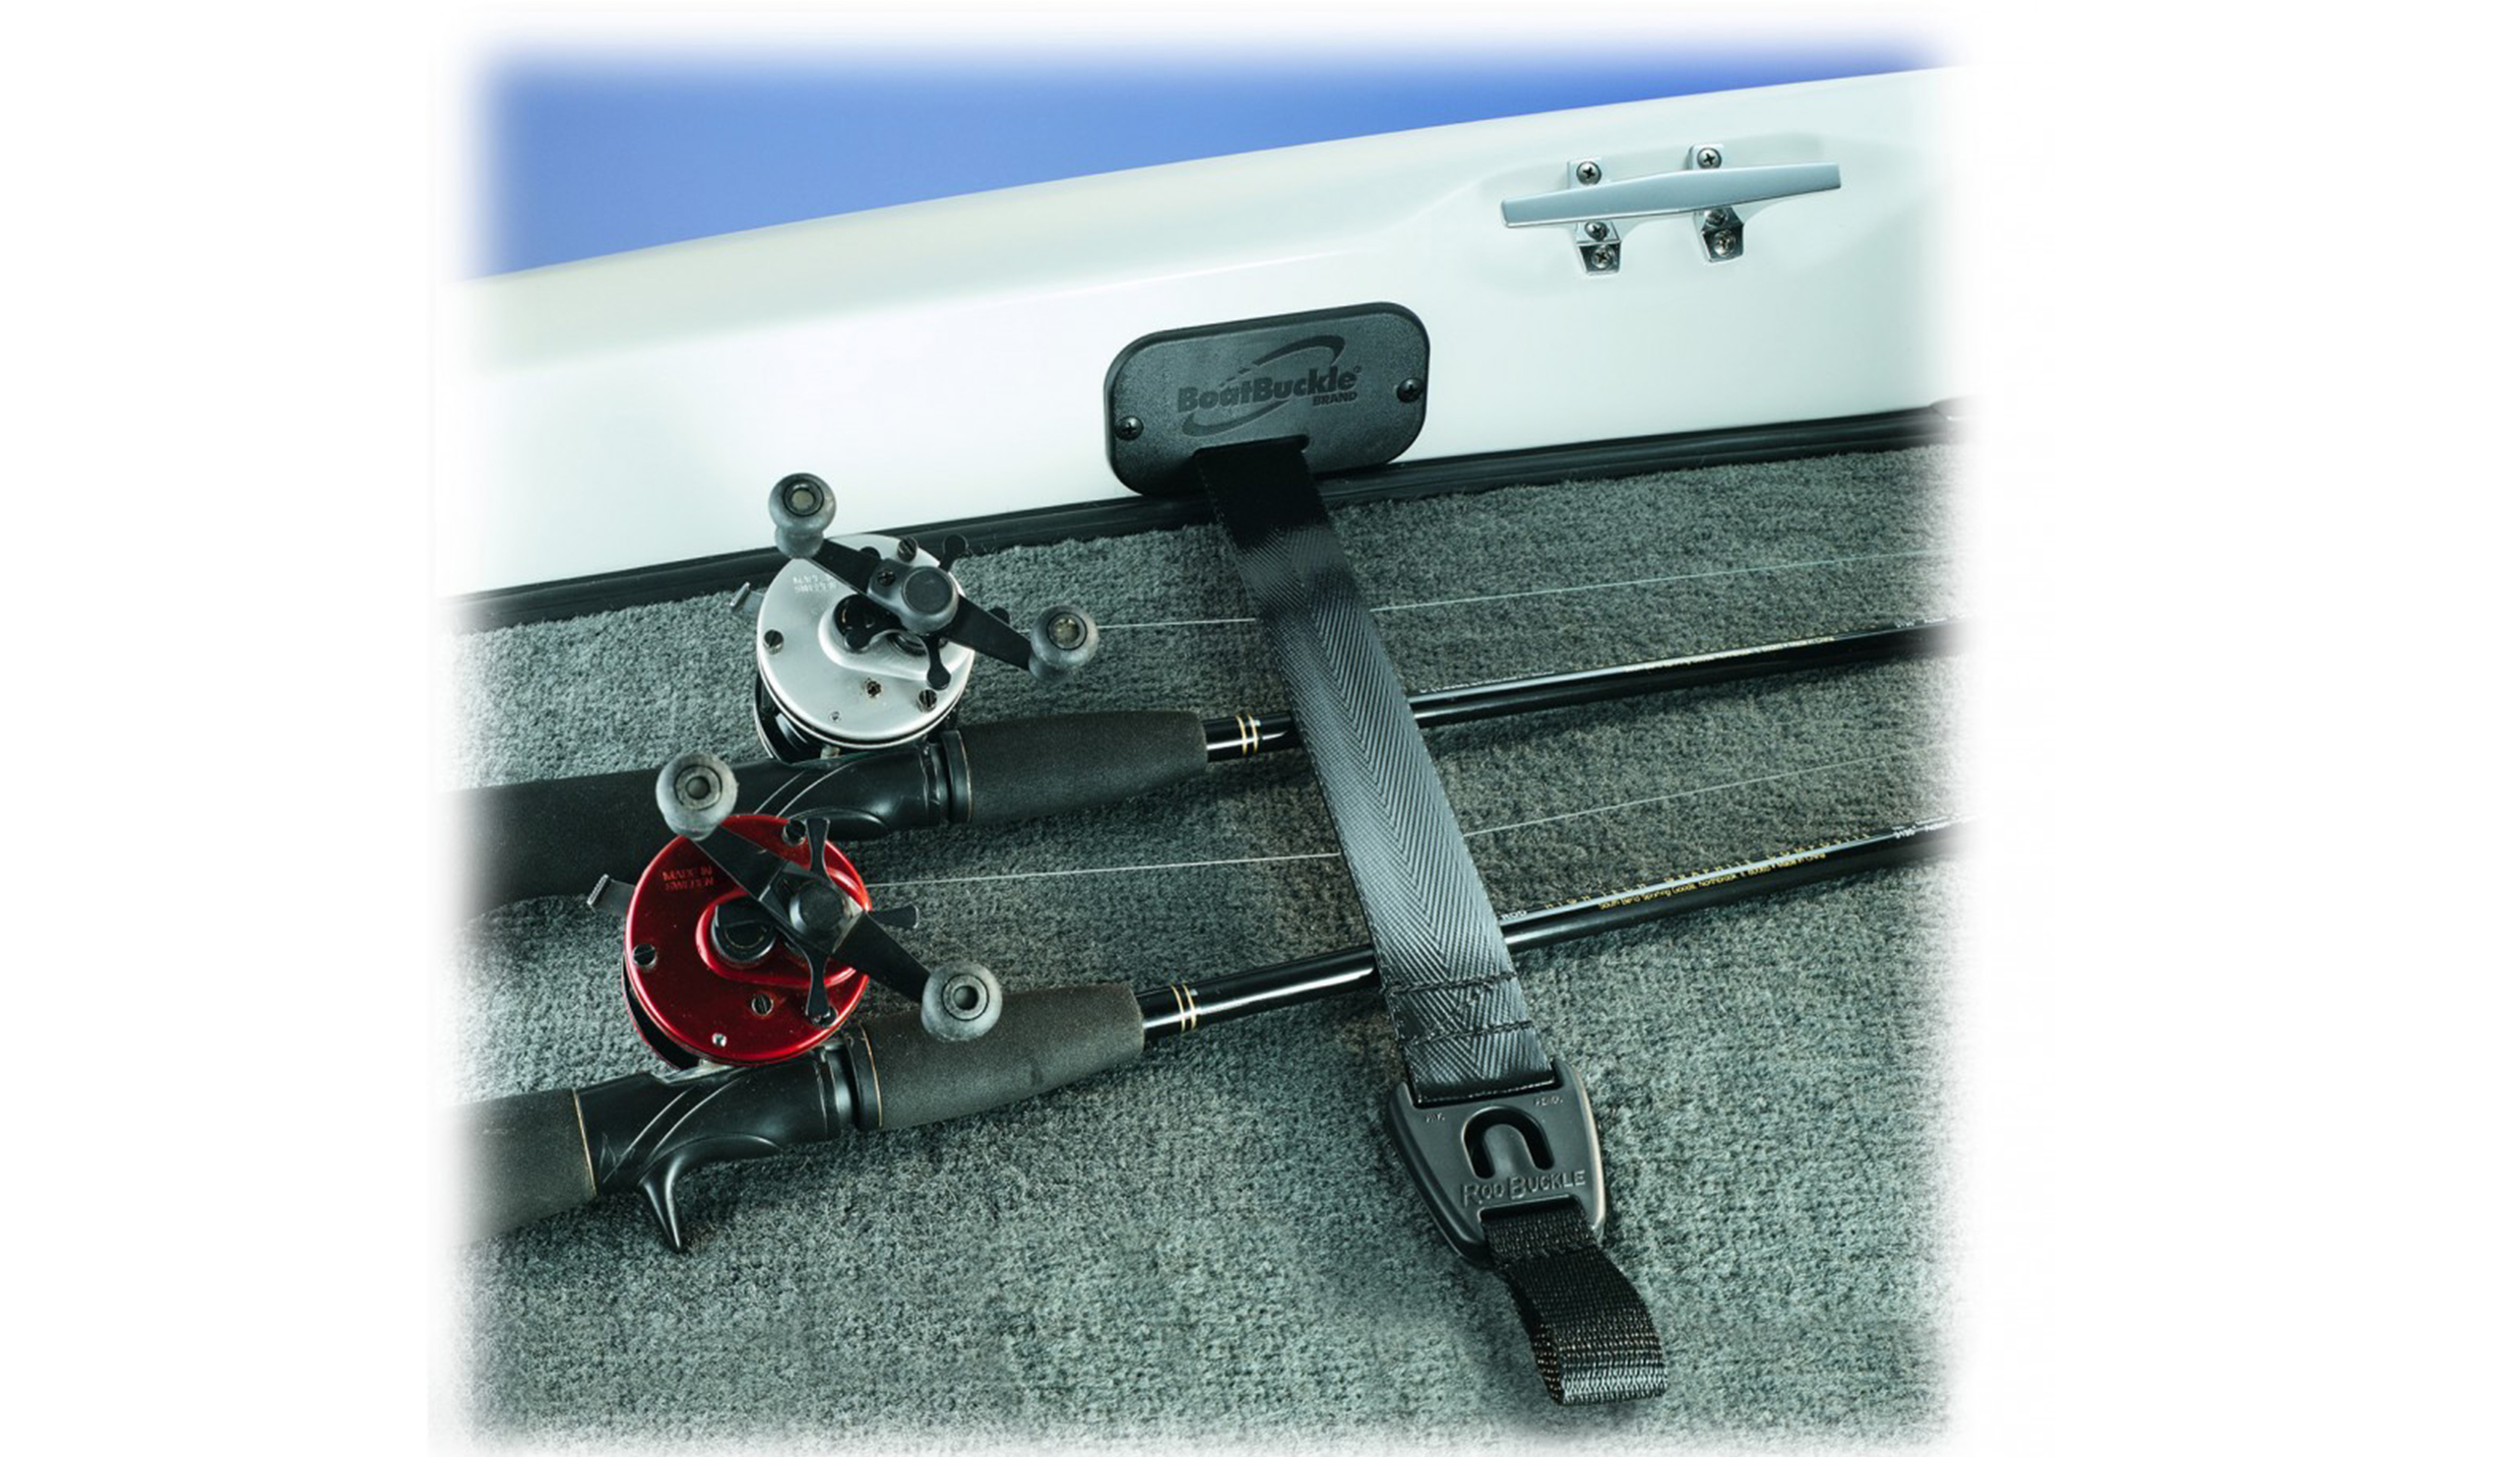 Rod Holder PLUS, Deck Mount by: Boatbuckle Part No: F15433 - Canada -  Canadian Dollars